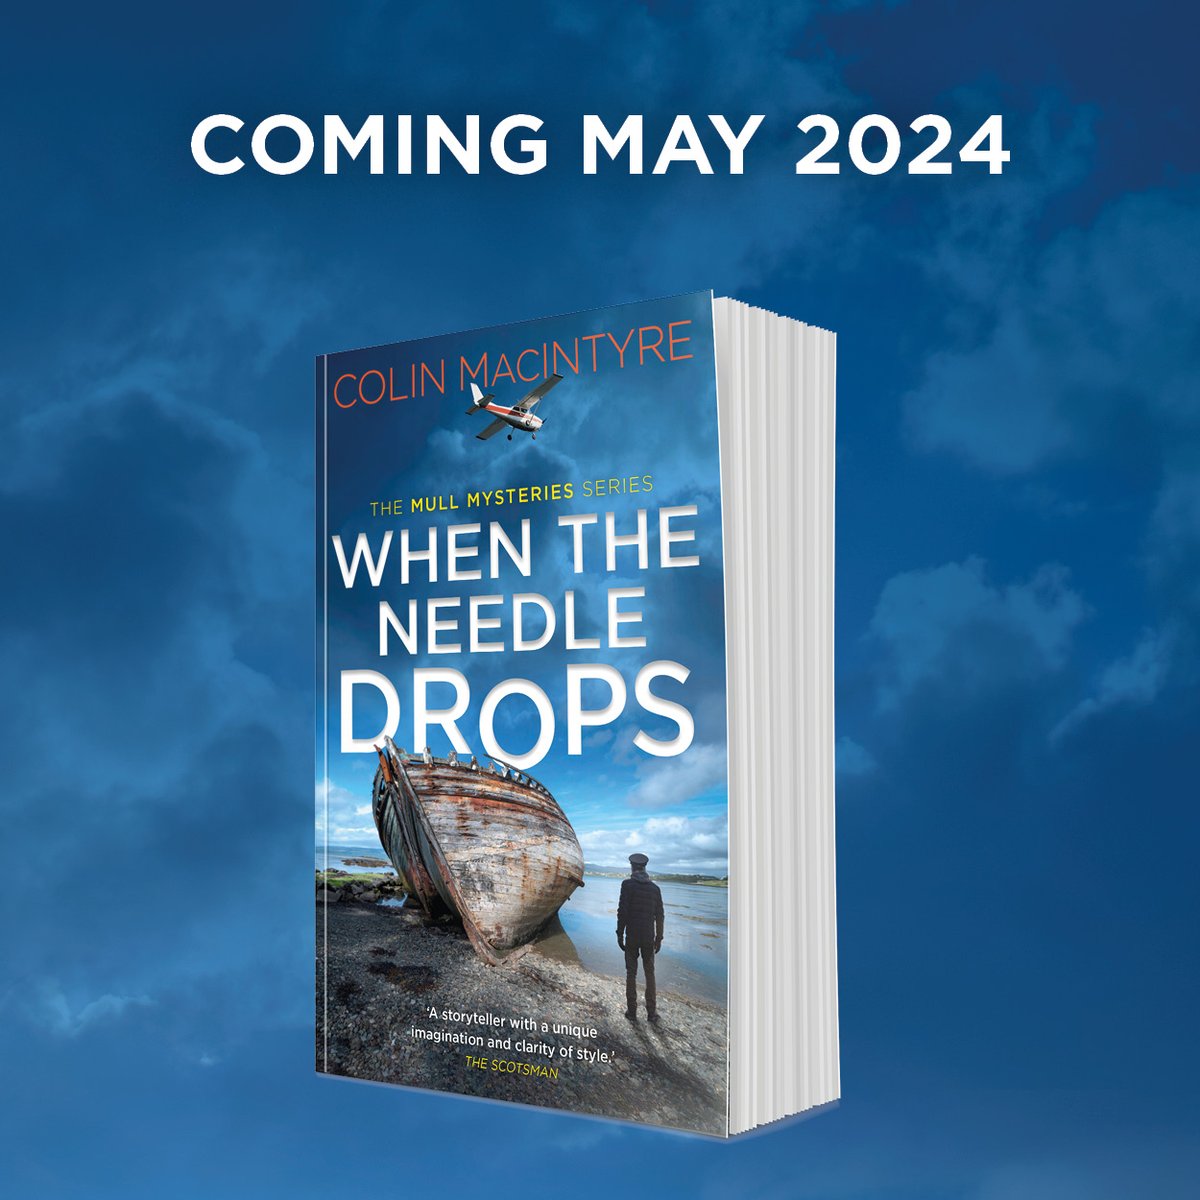 We are thrilled to reveal the cover of When the Needle Drops, book one in The Mull Mysteries Series by @colinmacIntyre AKA @MullHistorical! Based on the unresolved case of the real Mull Air Mystery, this gripping novel is out 9th May! Pre-order now: linktr.ee/colinmacintyre